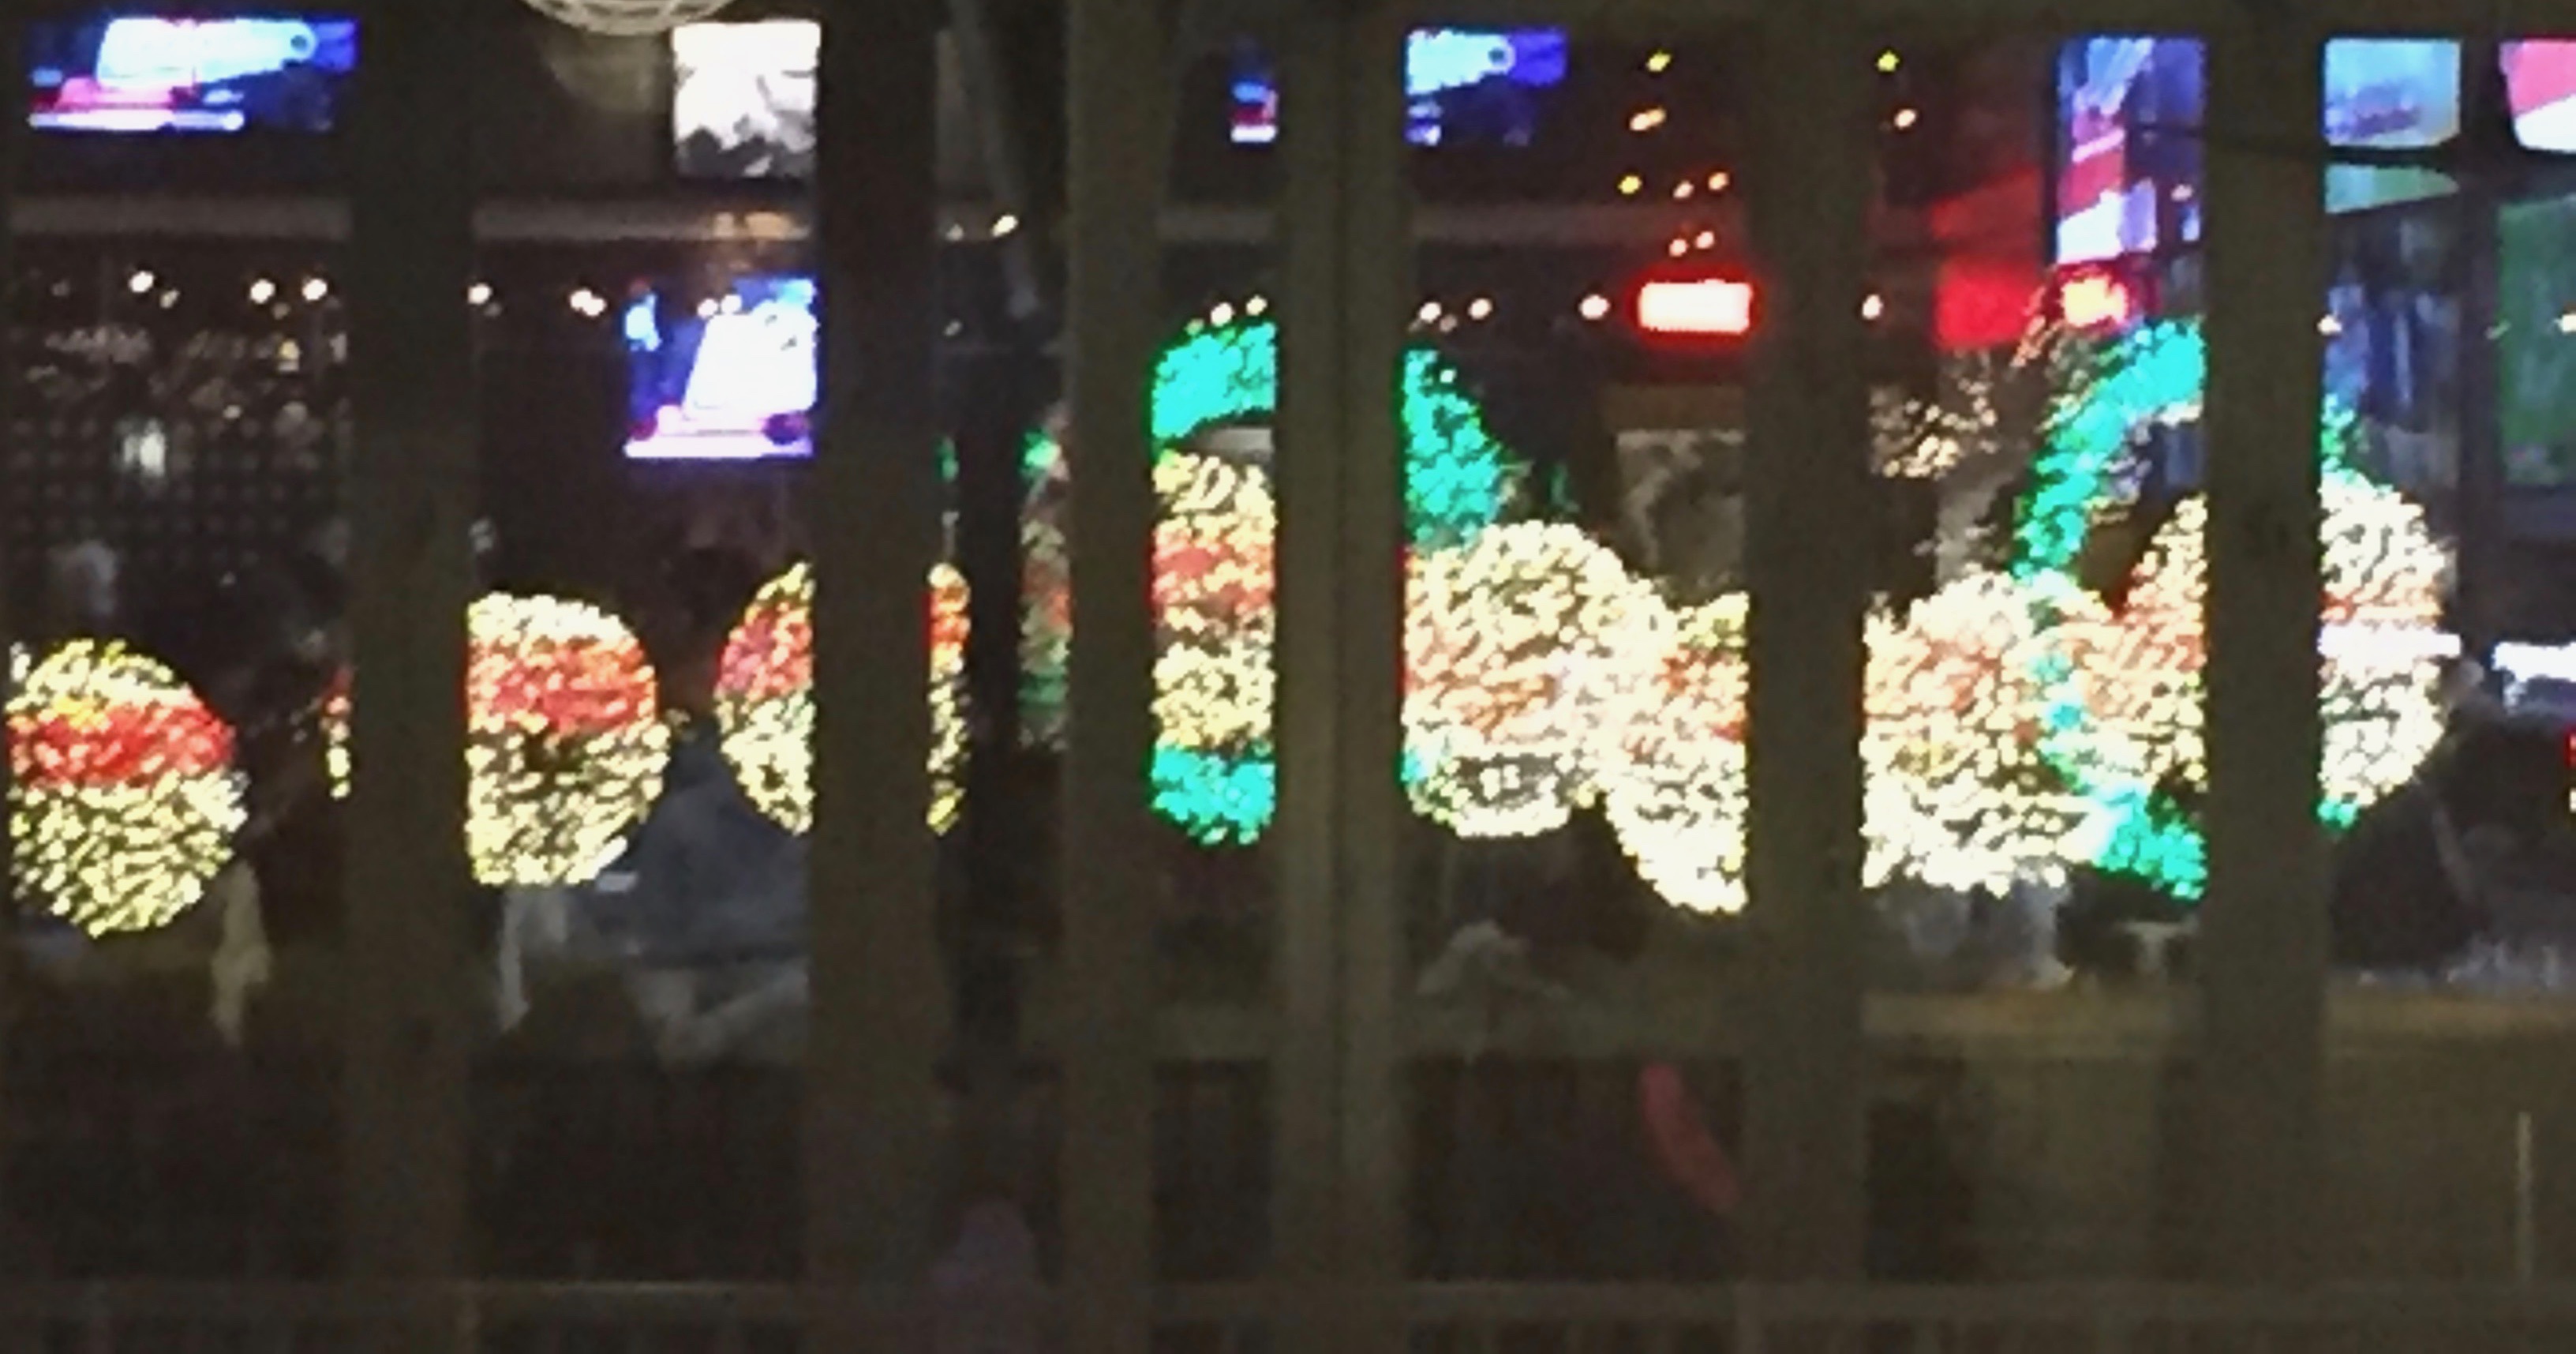 It's the weekend! Number 83, Holiday Lights Reflected in a Tavern's Windows